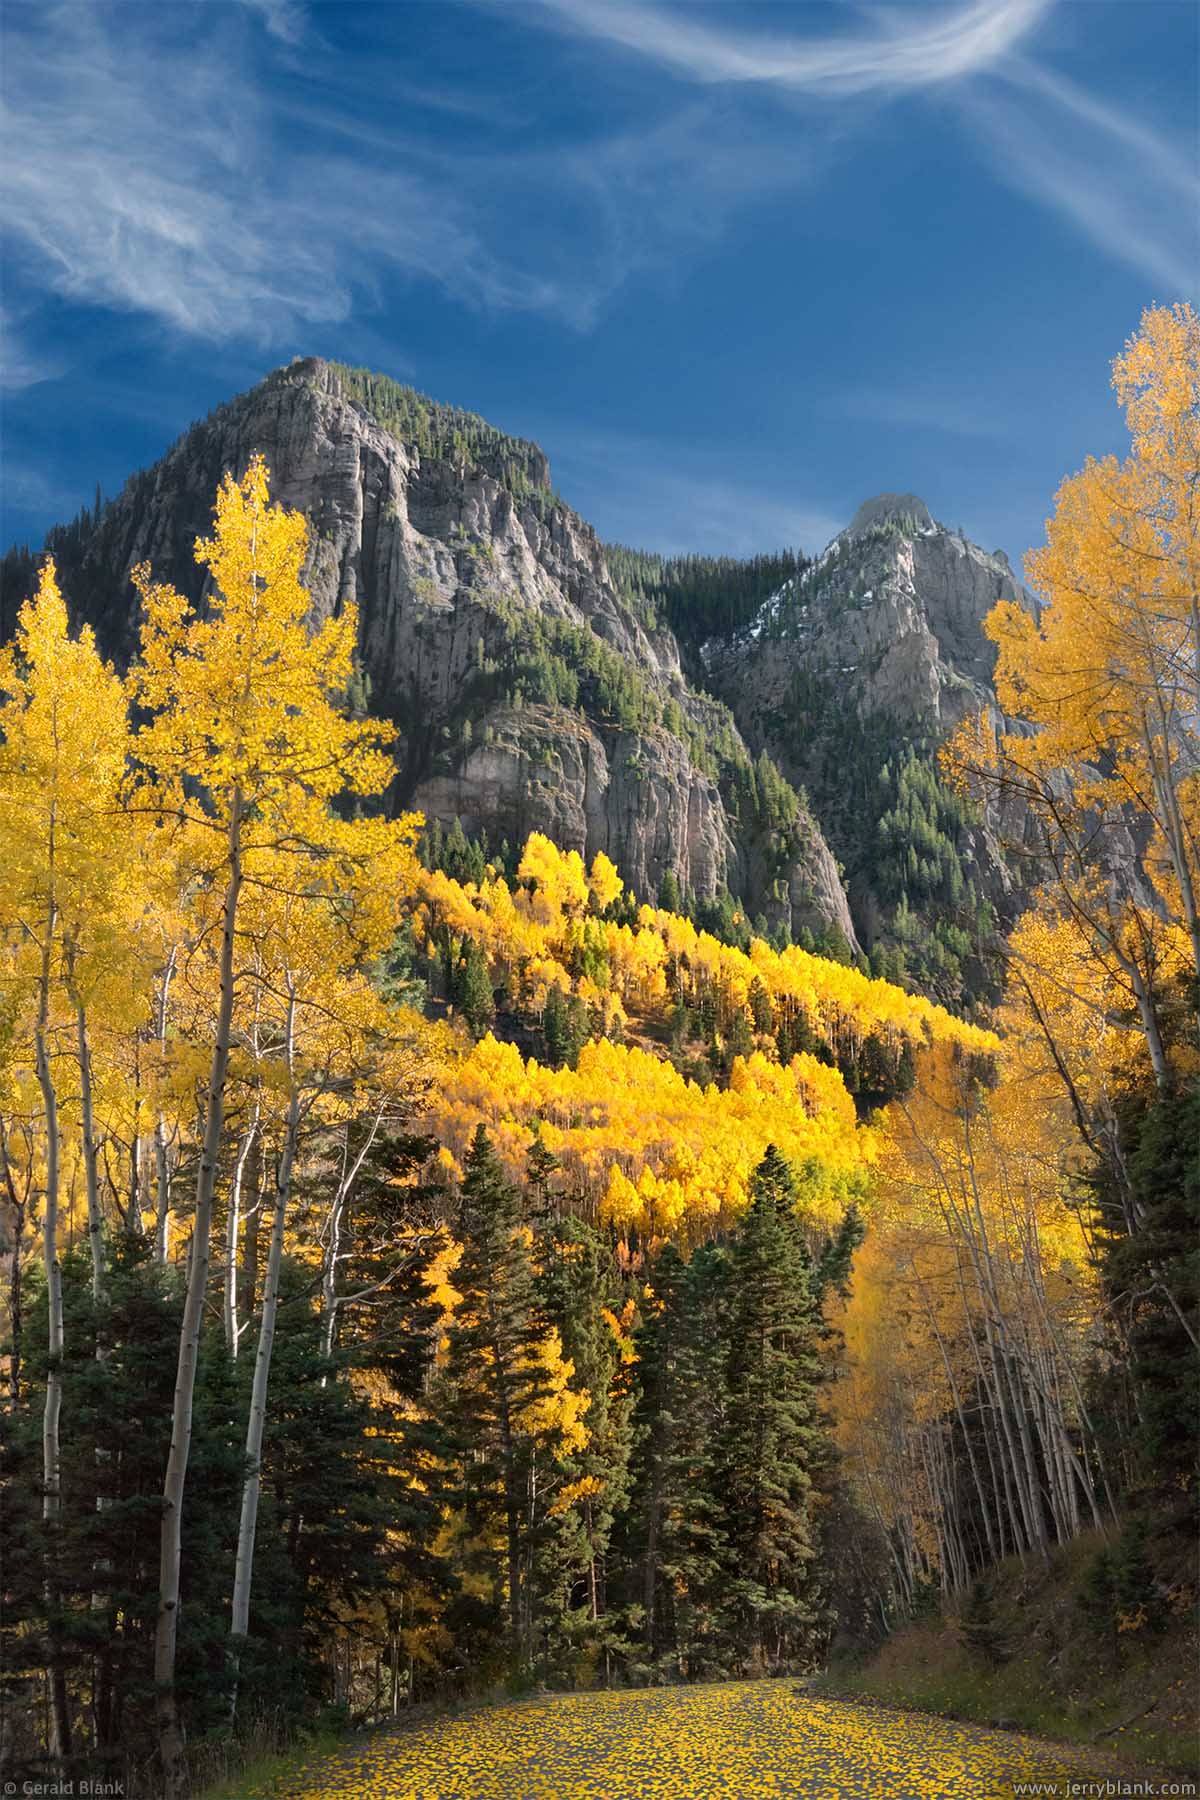 #06883 - Autumn aspen leaves decorate Canyon Creek Road in the Uncompahgre National Forest, in Colorado’s San Juan Mountains - photo by Jerry Blank